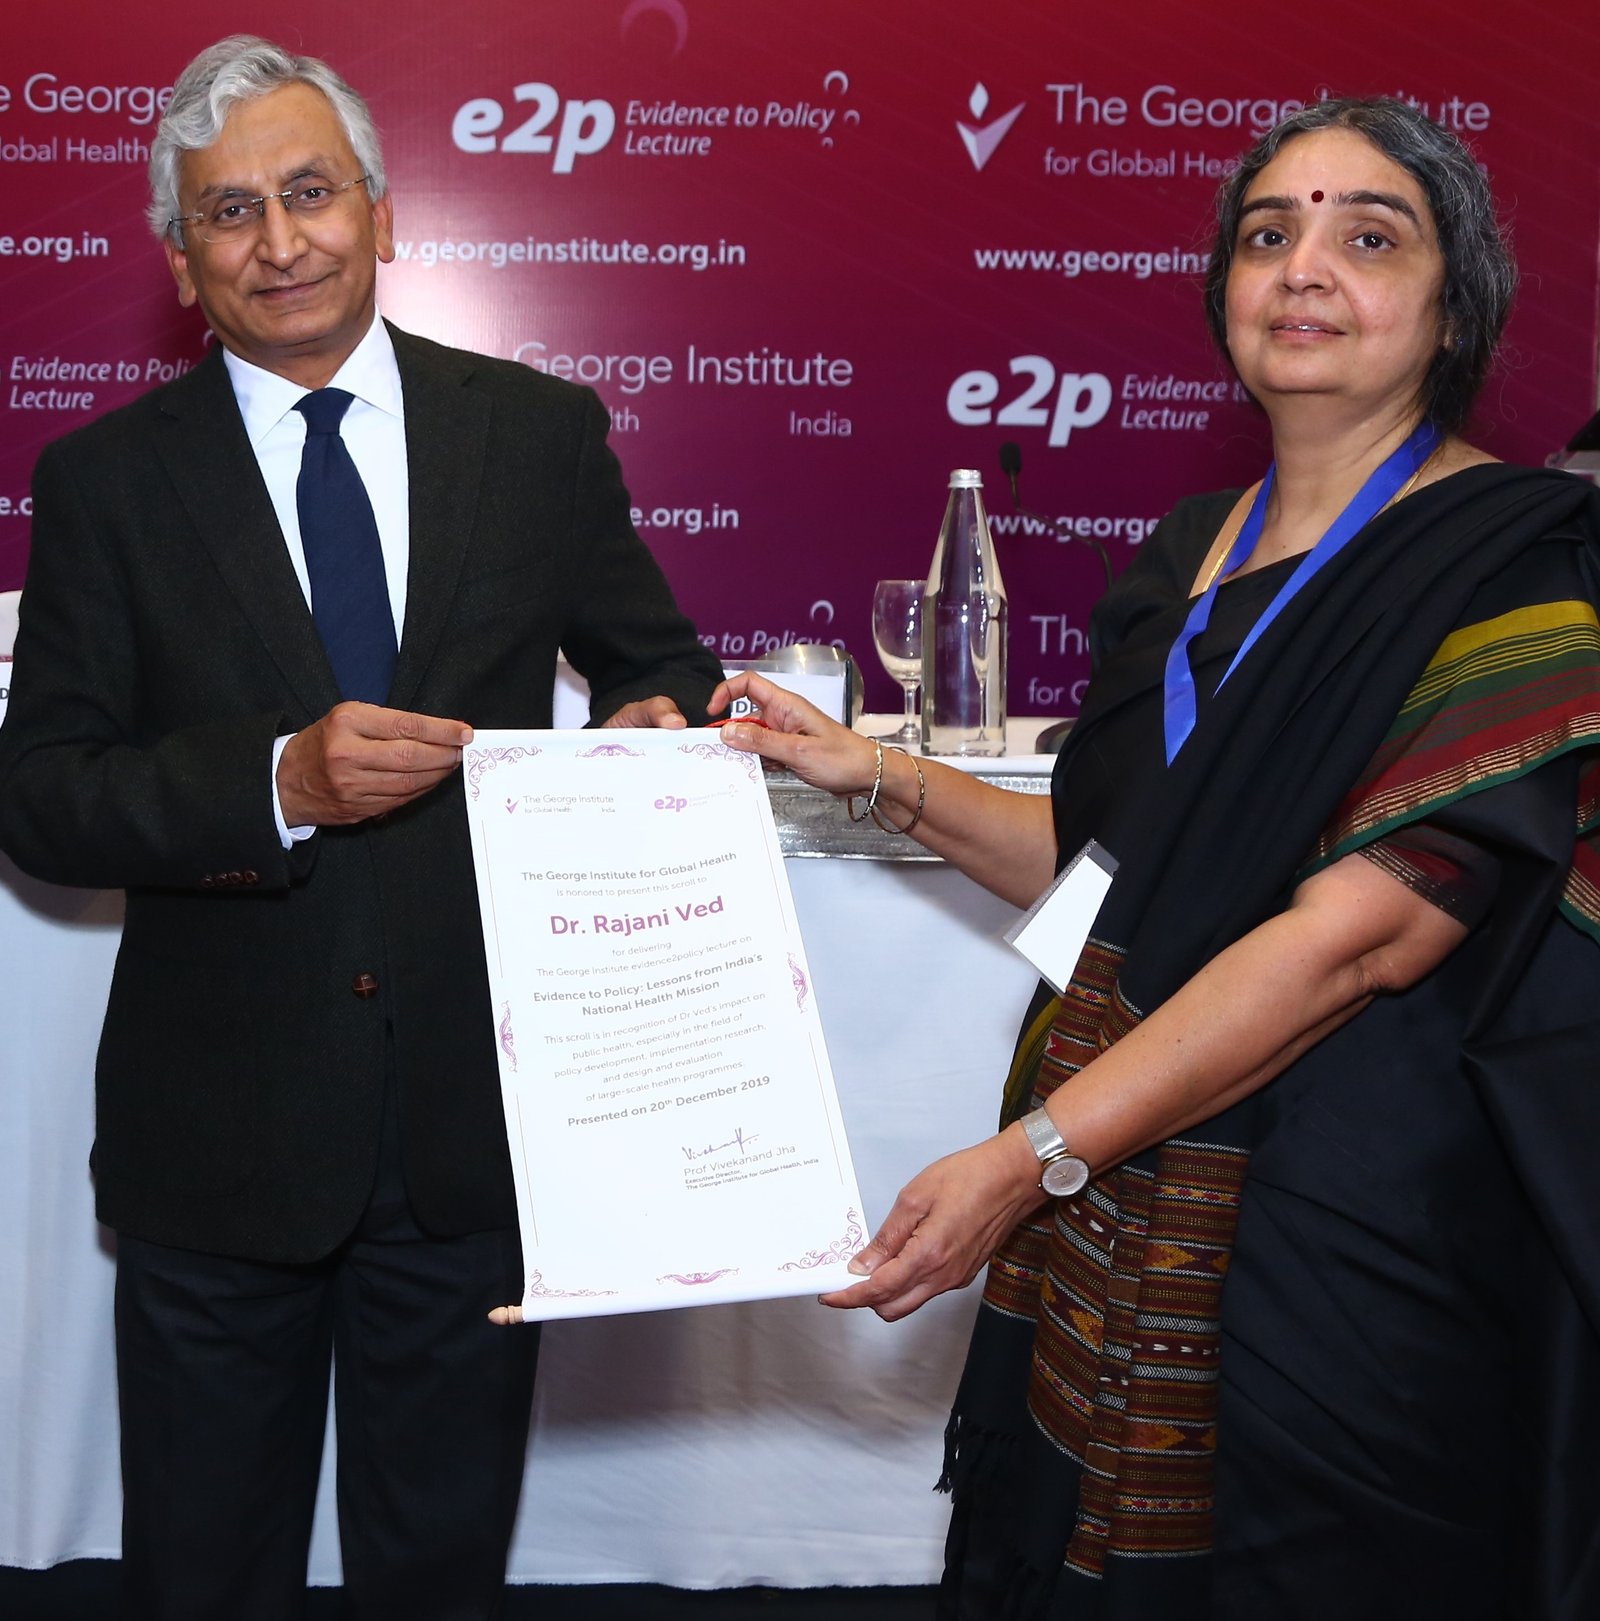 L-R: Prof Vivekanand Jha, Director of the George Institute India; Dr Rajani Ved, Executive Director of the National Health Systems Resource Centre (NHSRC) 